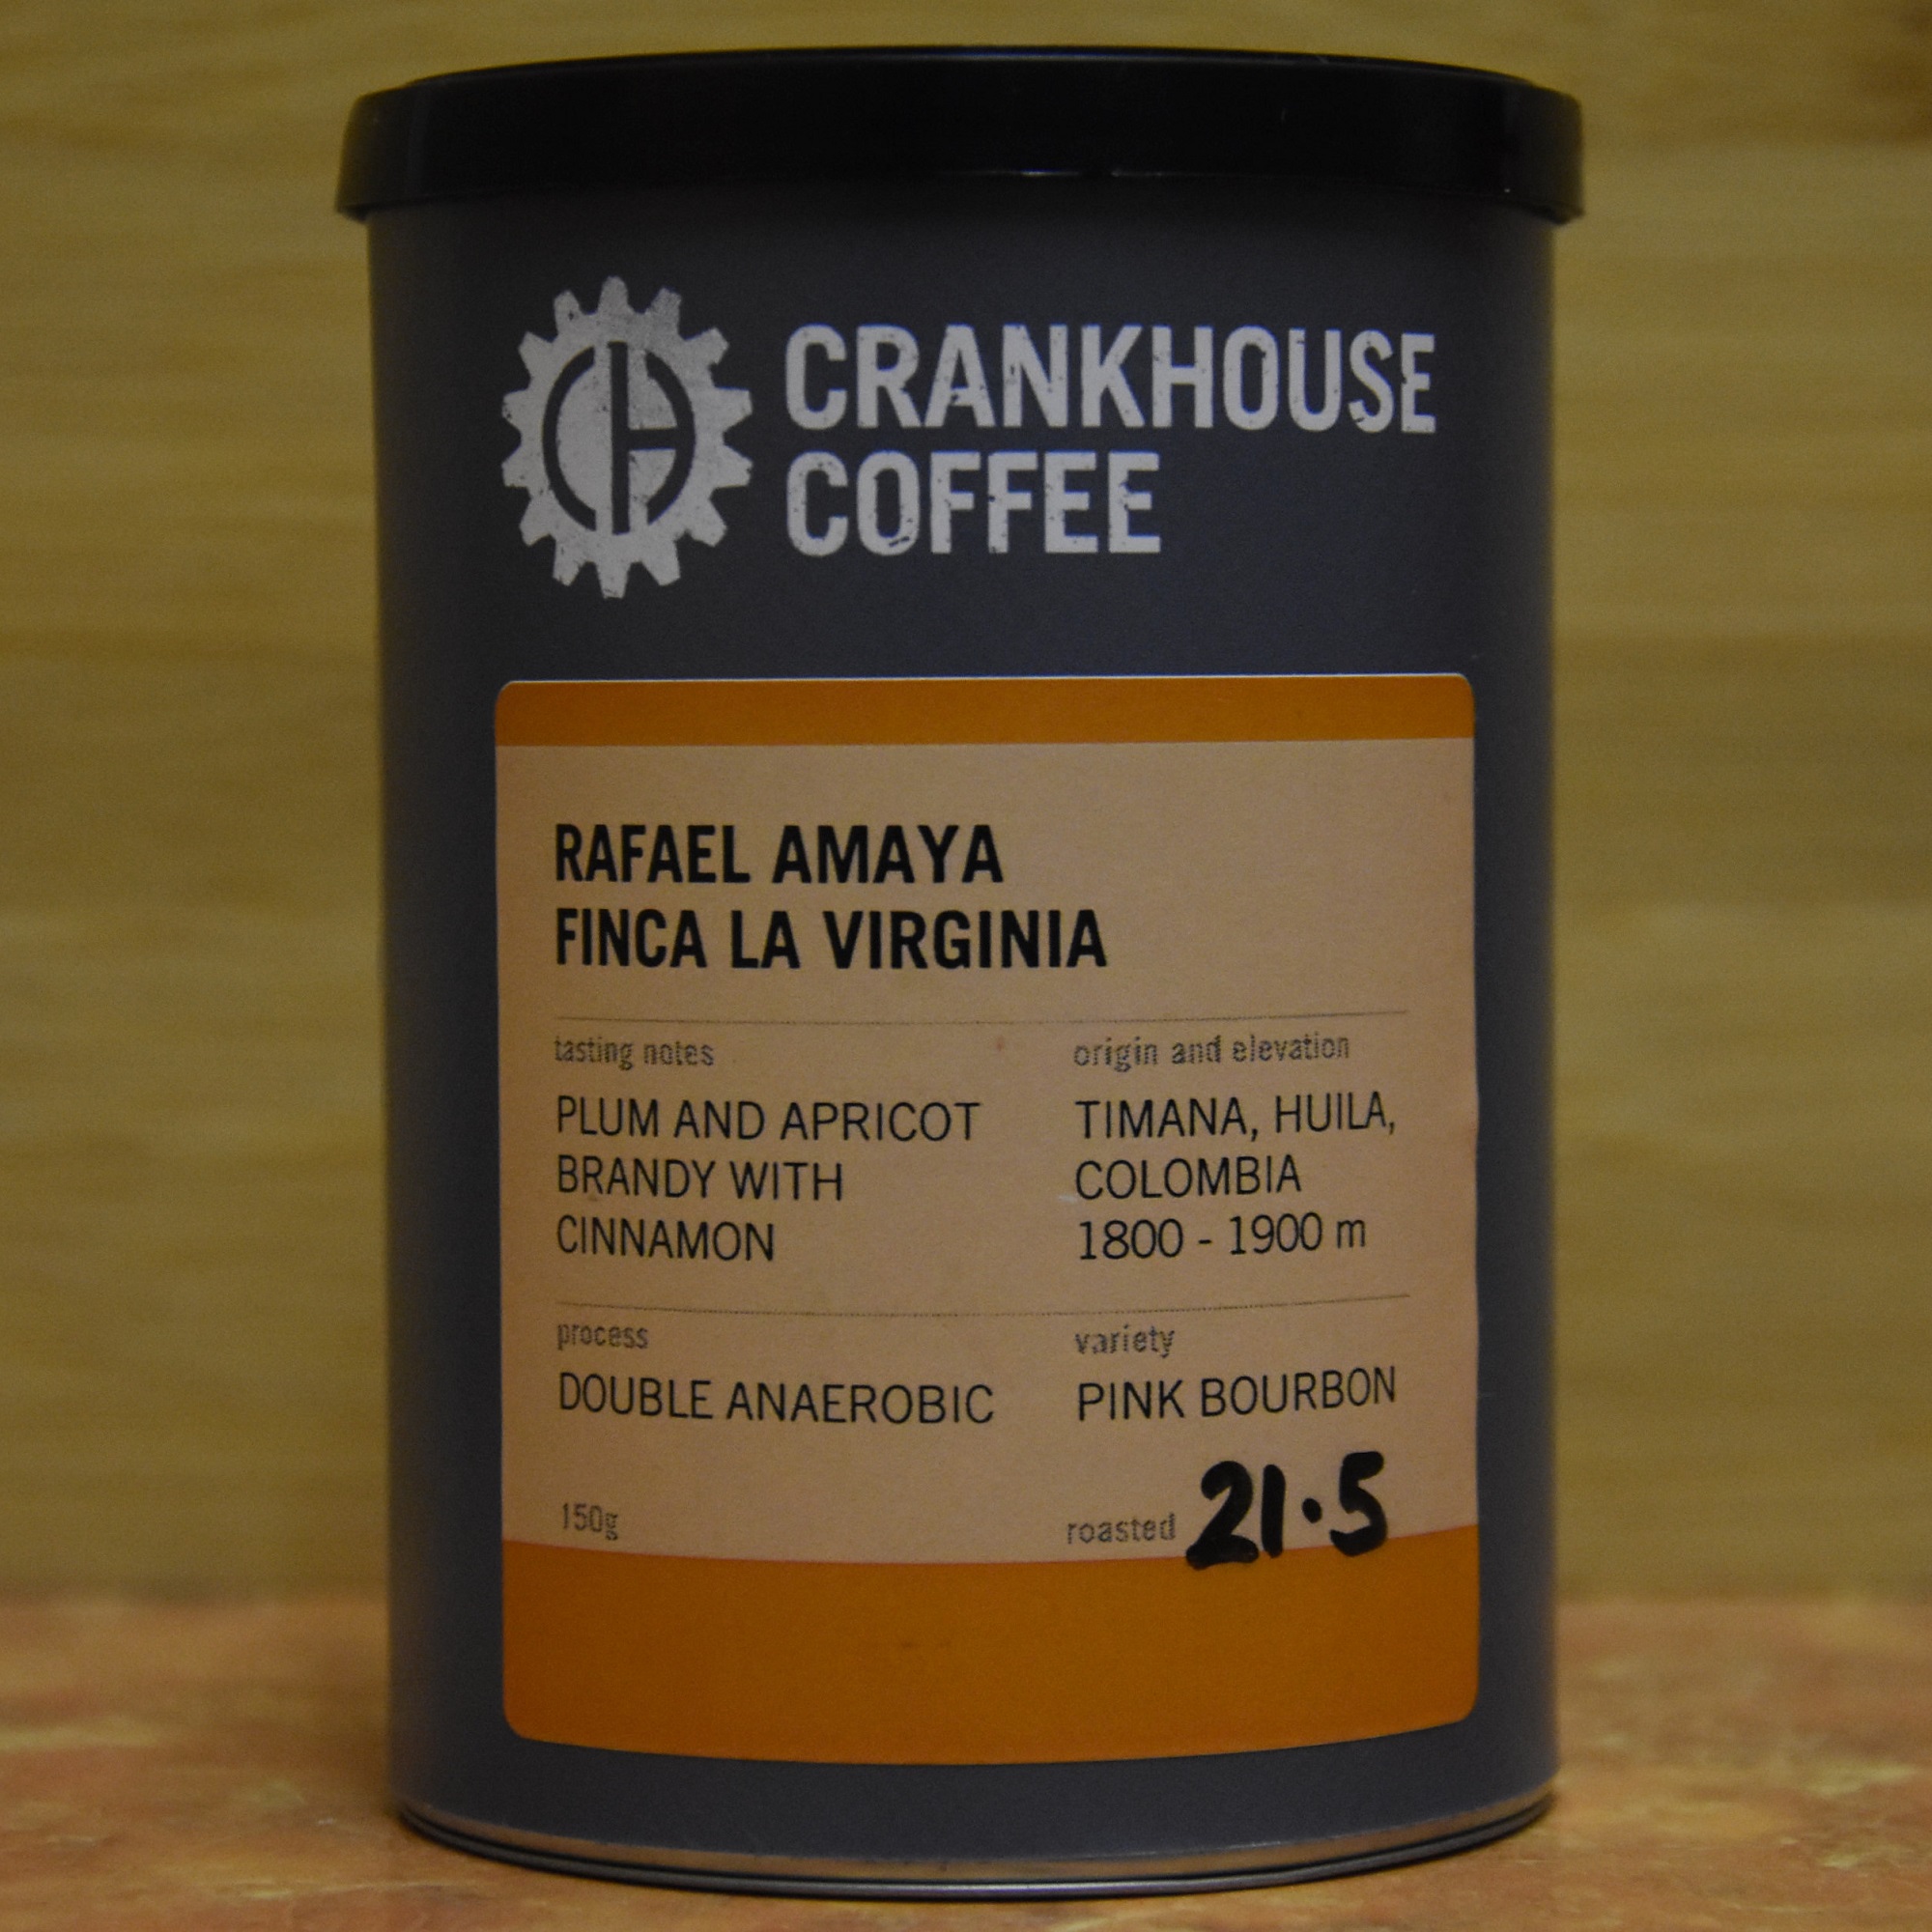 The front of a tin of coffee from Crankhouse Coffee, in this case the Finca La Virginia from Rafael Amaya in Timana in the Huila region of Colombia. It is a double anaerobic processed pink bourbon variety with tasting notes of plum and apricot brandy with cinnamon.